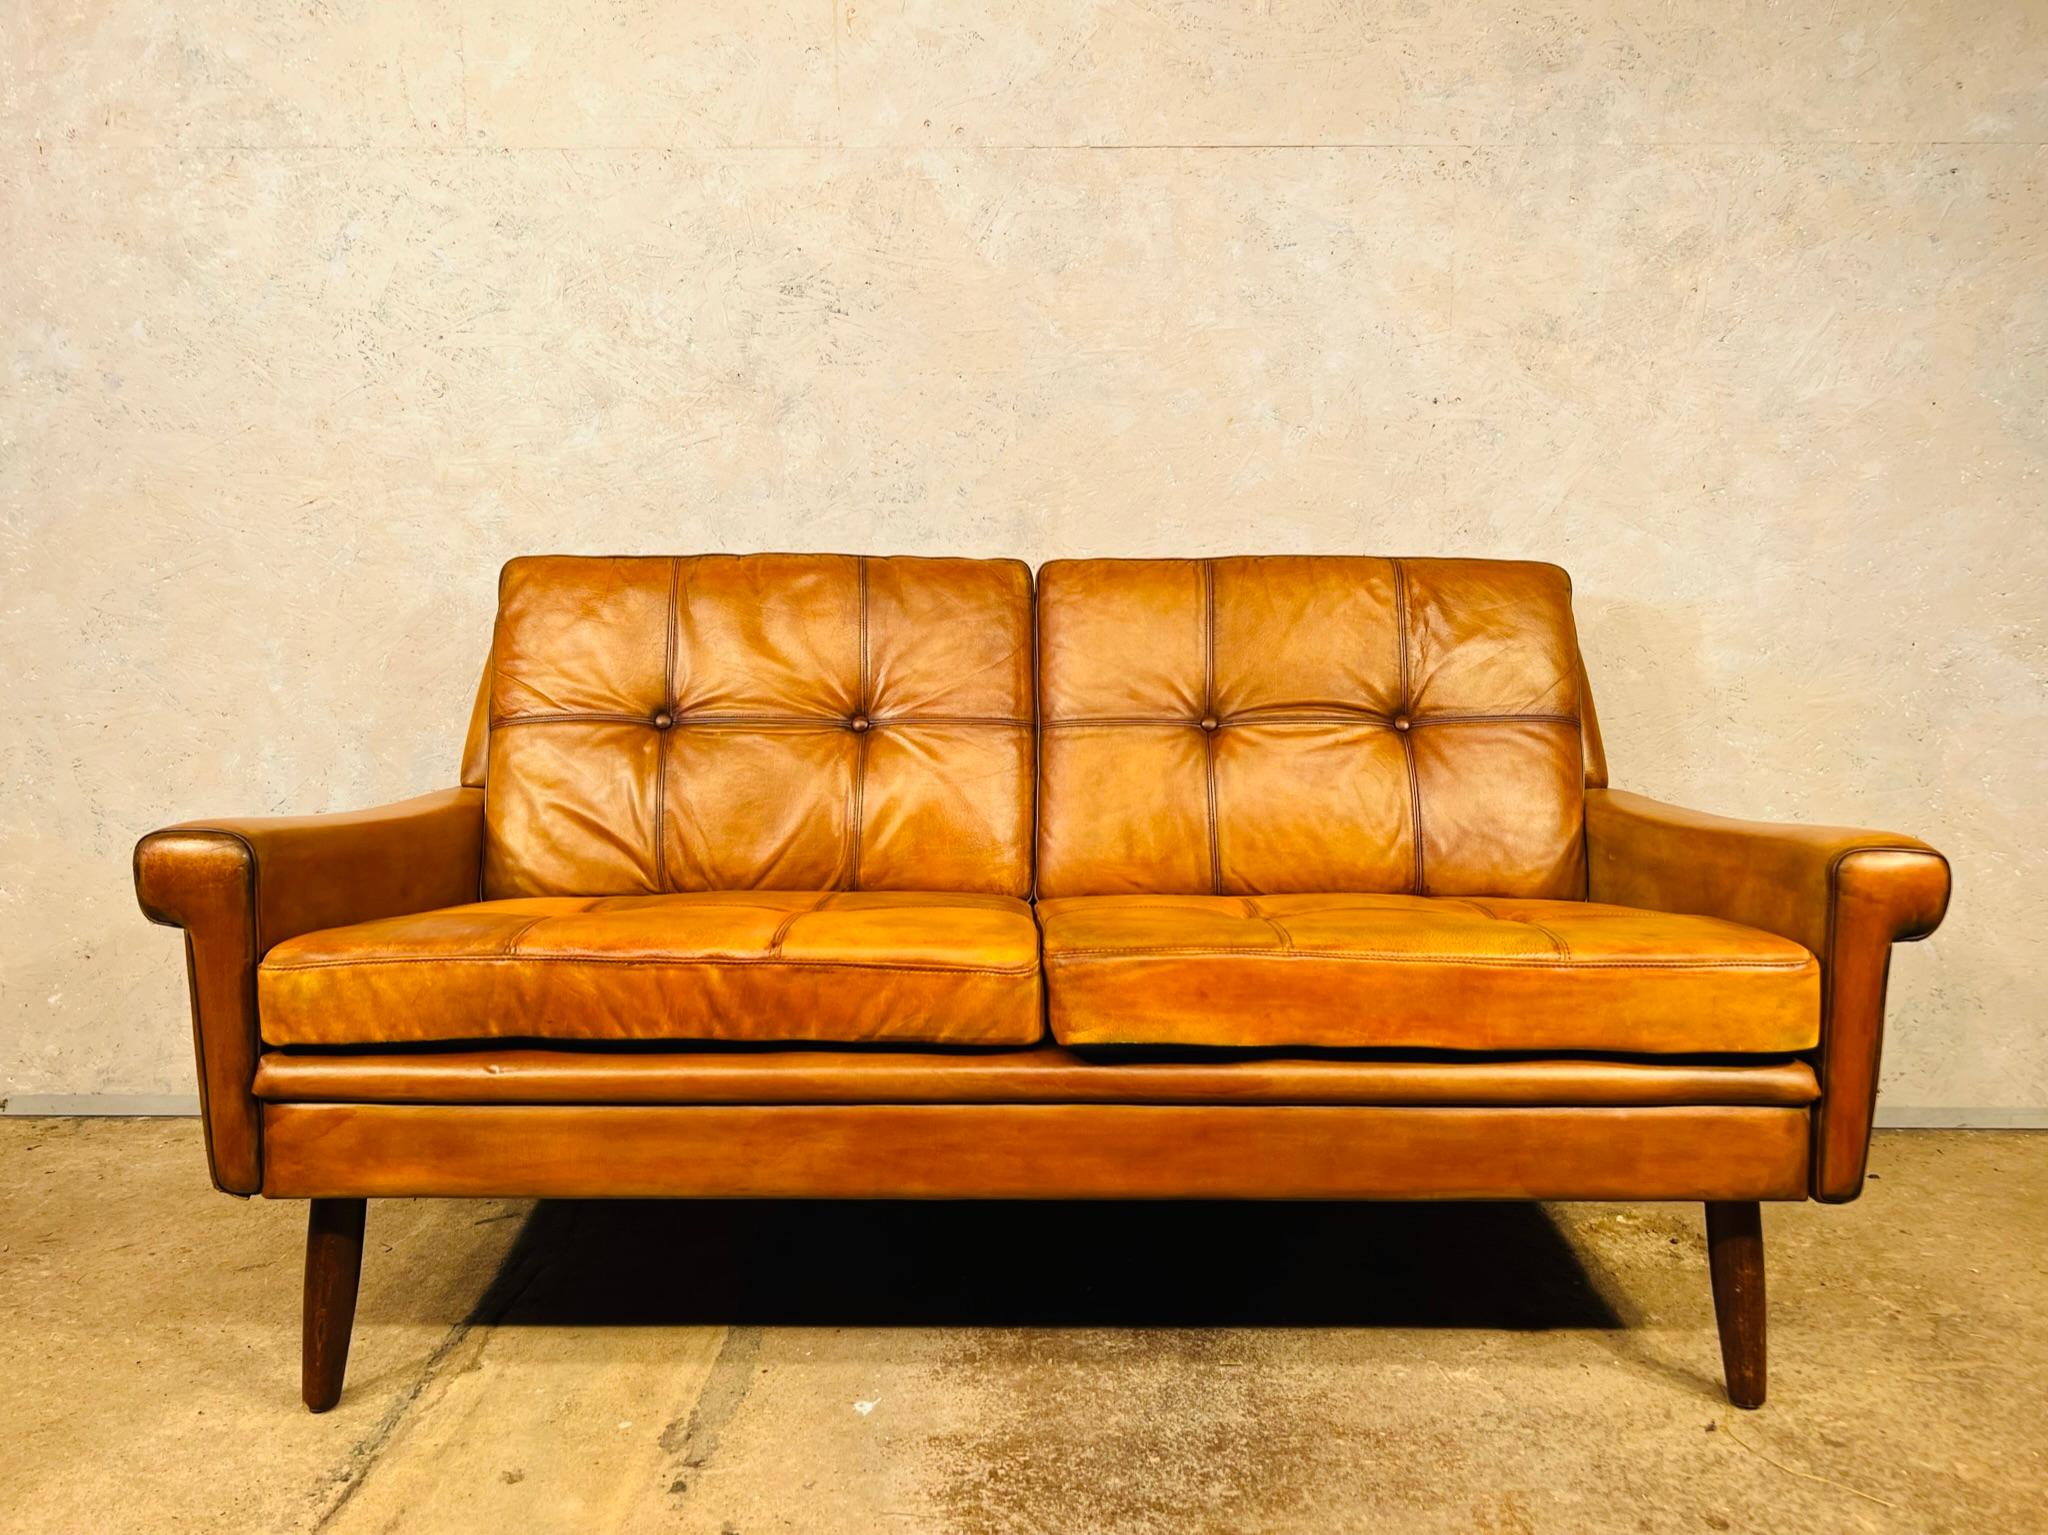 A Vintage 1970s Three seater Leather sofa by Danish Designer Svend Skipper

A very stylish sofa with a beautiful compact design at the same time very comfortable to sit in.

It is a great tan colour, in excellent vintage condition.

Viewings welcome